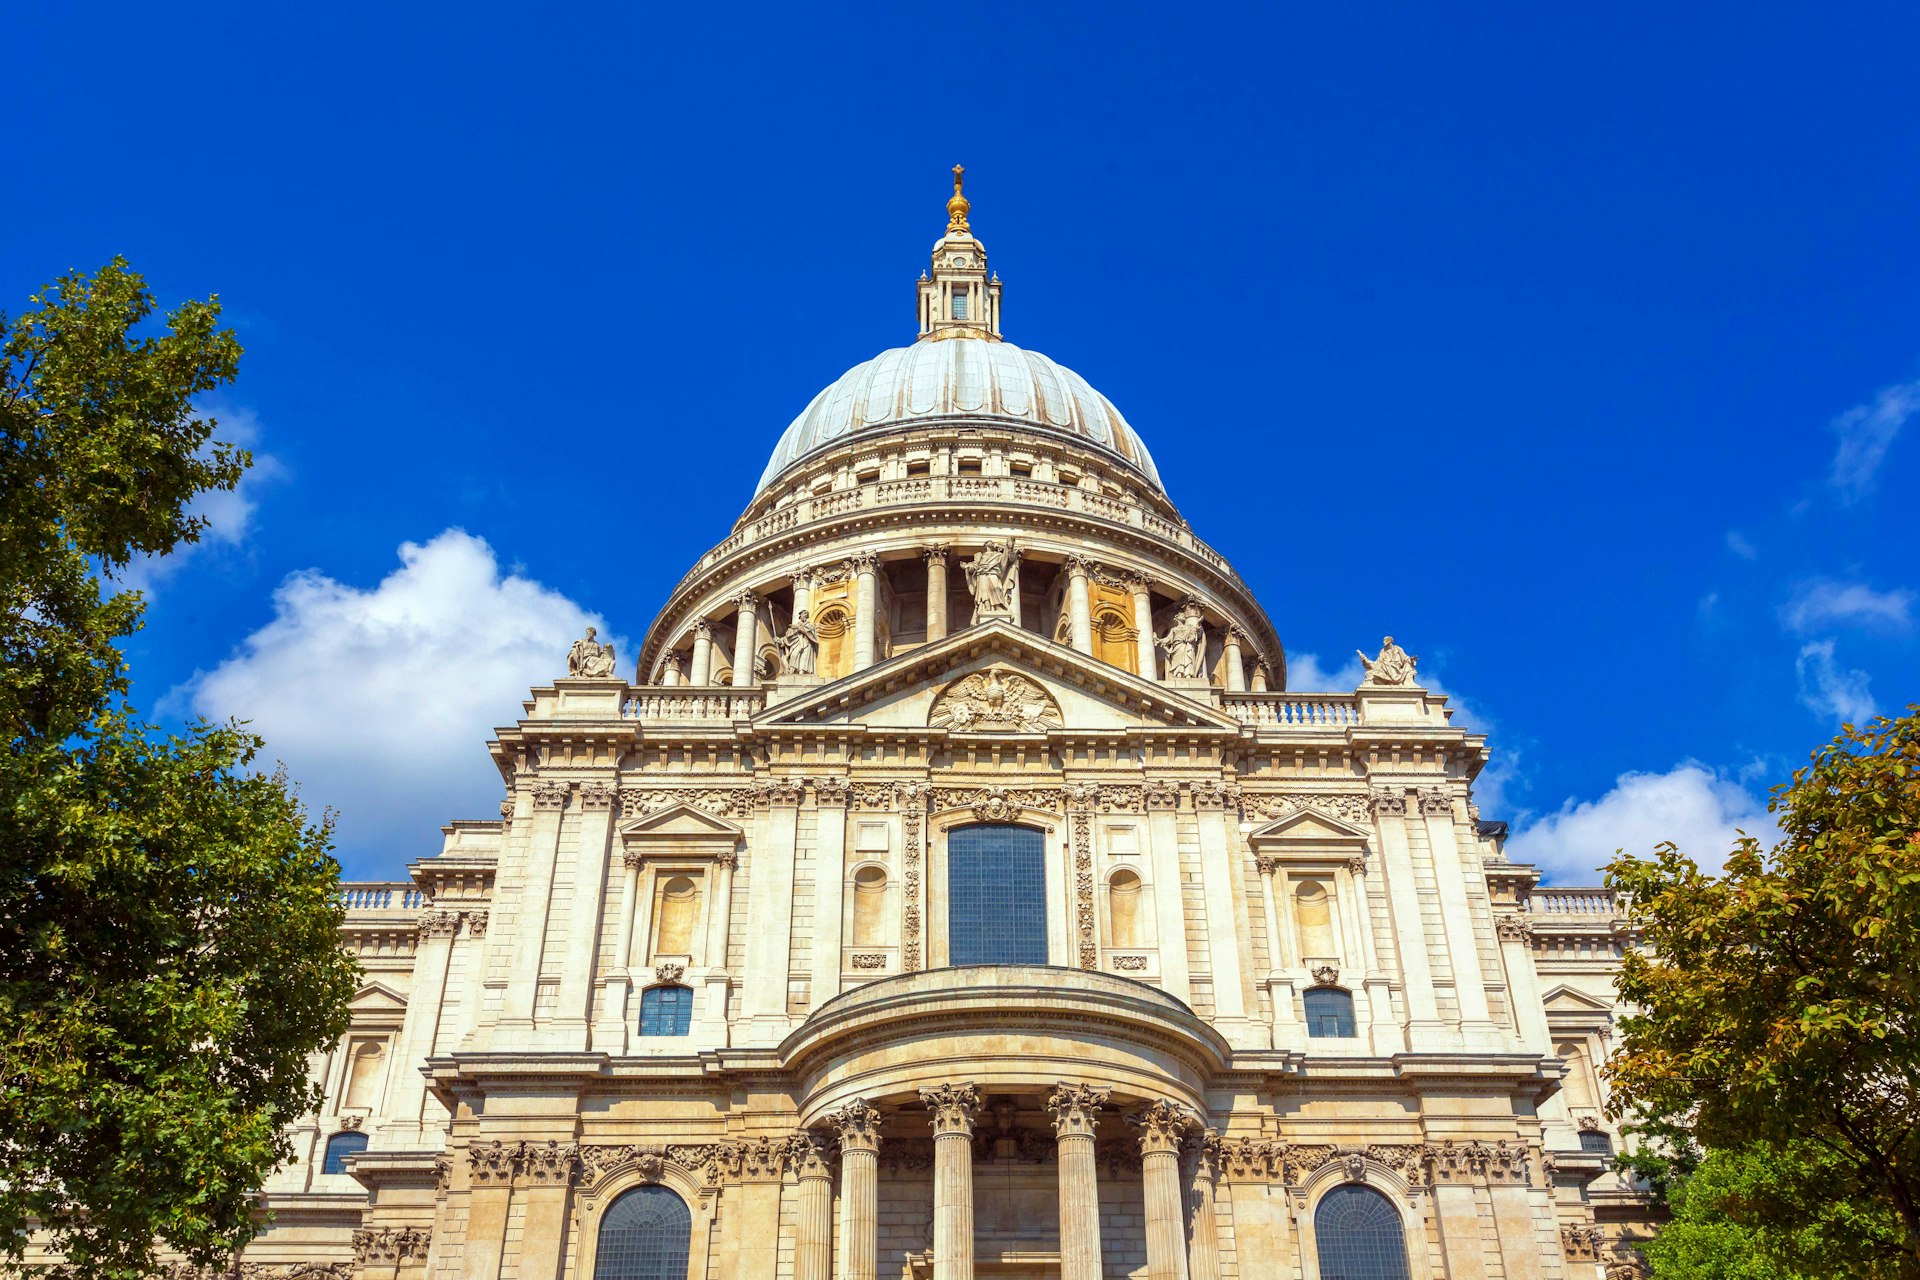 The dome of St Paul's Cathedral against a bright blue sky